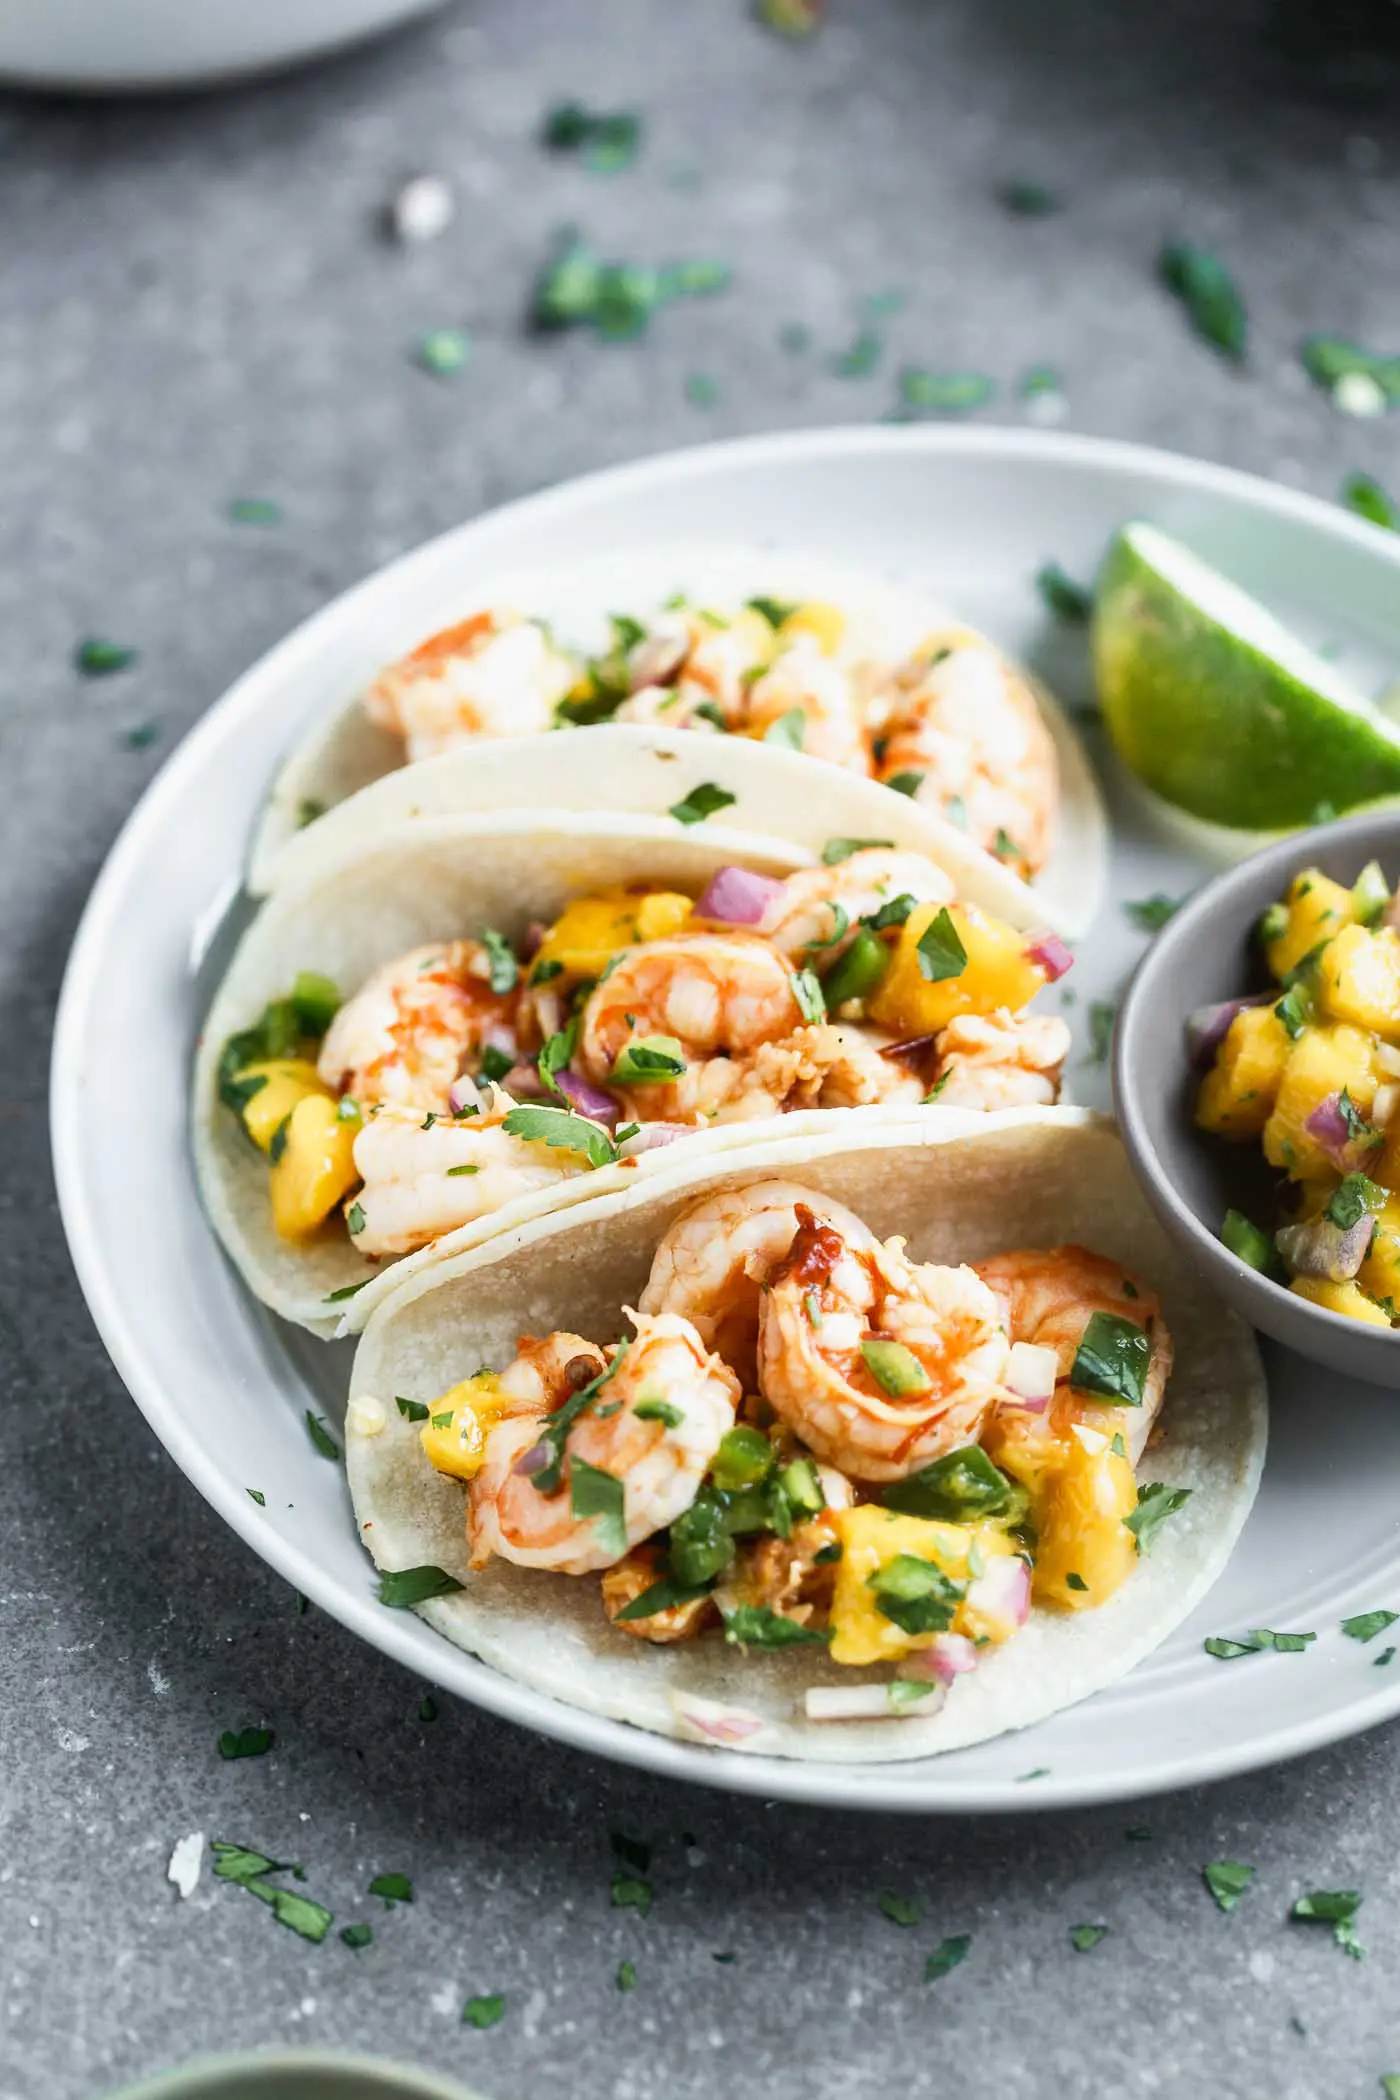 These&nbsp;Easy Chipotle Shrimp Tacos with Mango Salsa are perfect for breezy summer lunches, healthy dinners, or any kind of celebration. Plump shrimp are flavored with chipotle peppers, lime juice, and honey, baked and nestled into corn tortillas (or lettuce wraps!). Each taco is topped off with a quick homemade mango salsa, a little bit of cilantro, and ready to be served!